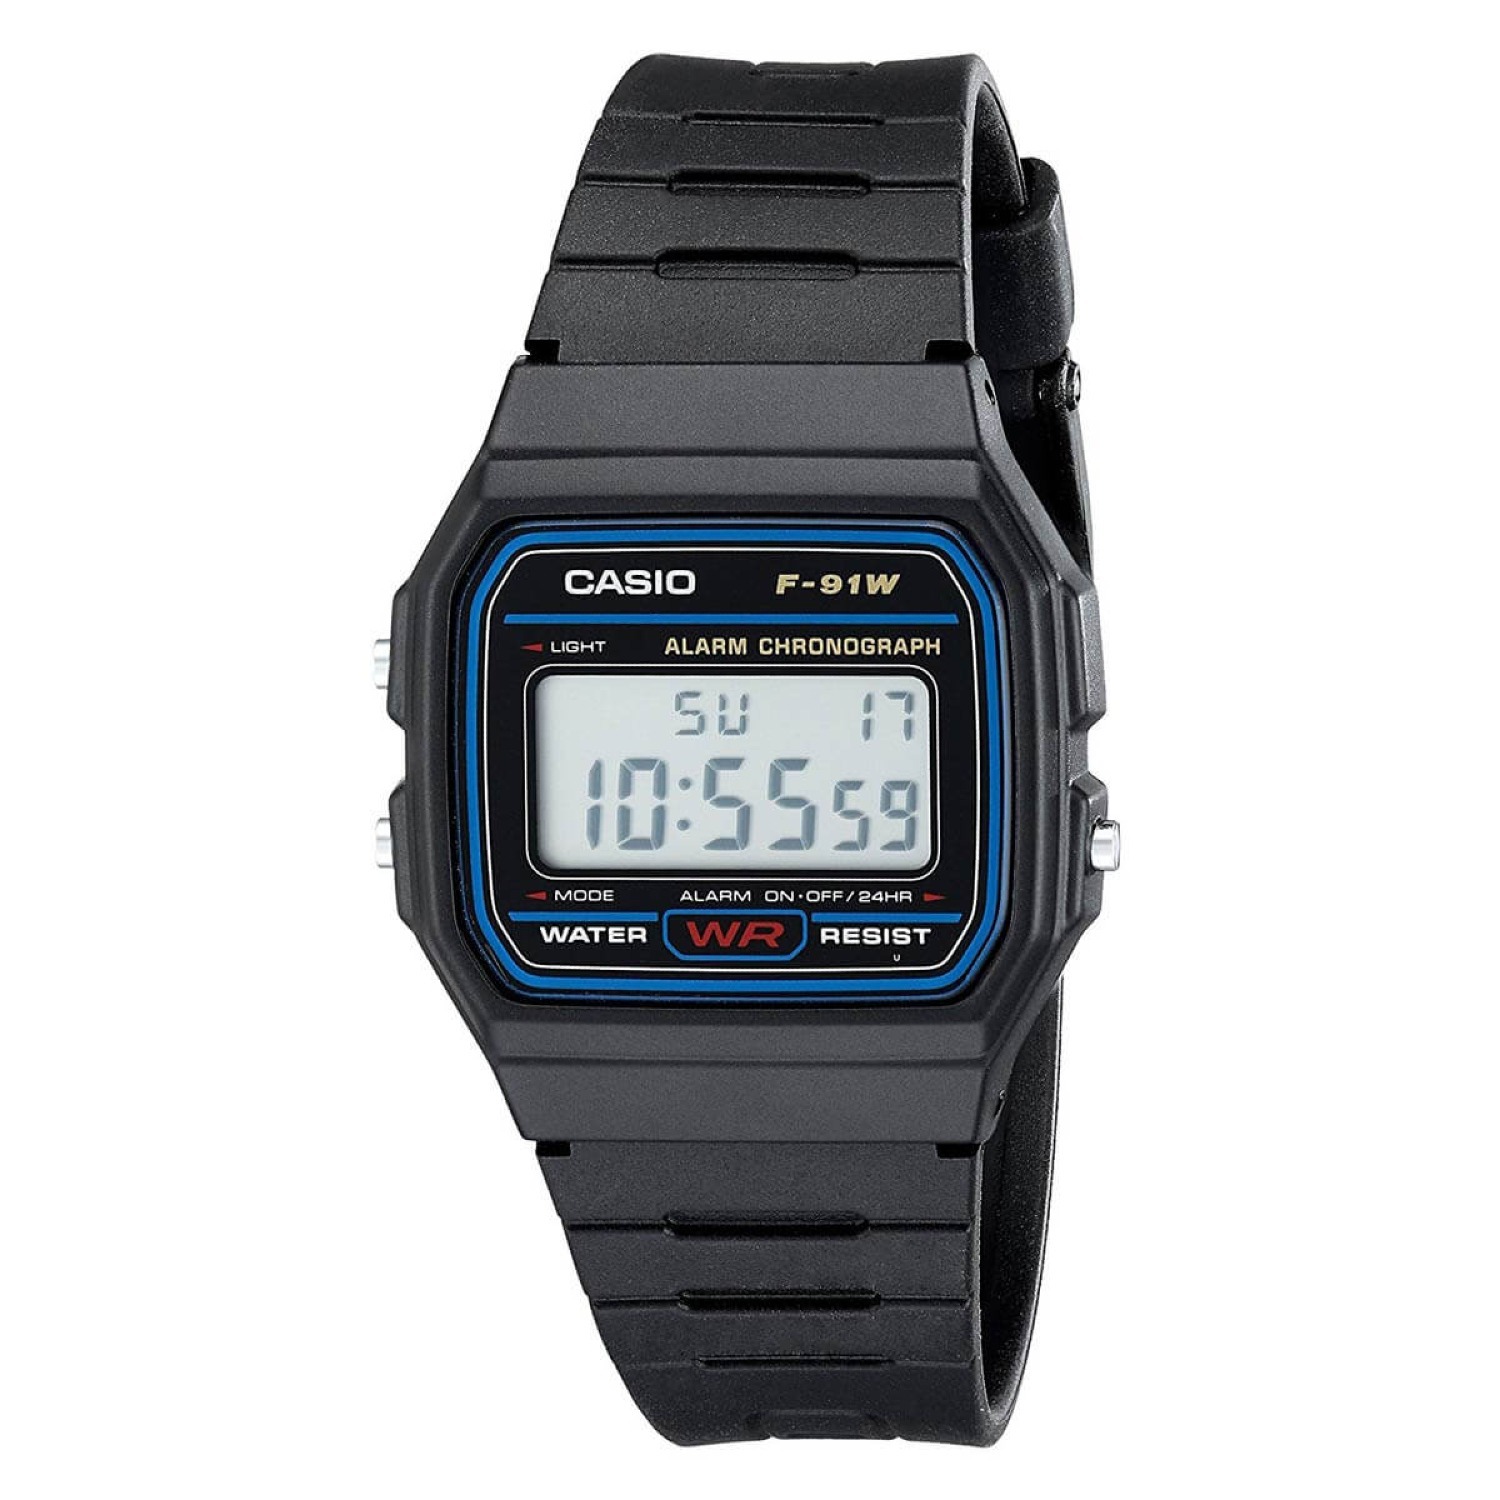 Casio Men's Classic Chronograph Digital Watch with Black Resin Strap $6 + $3.99